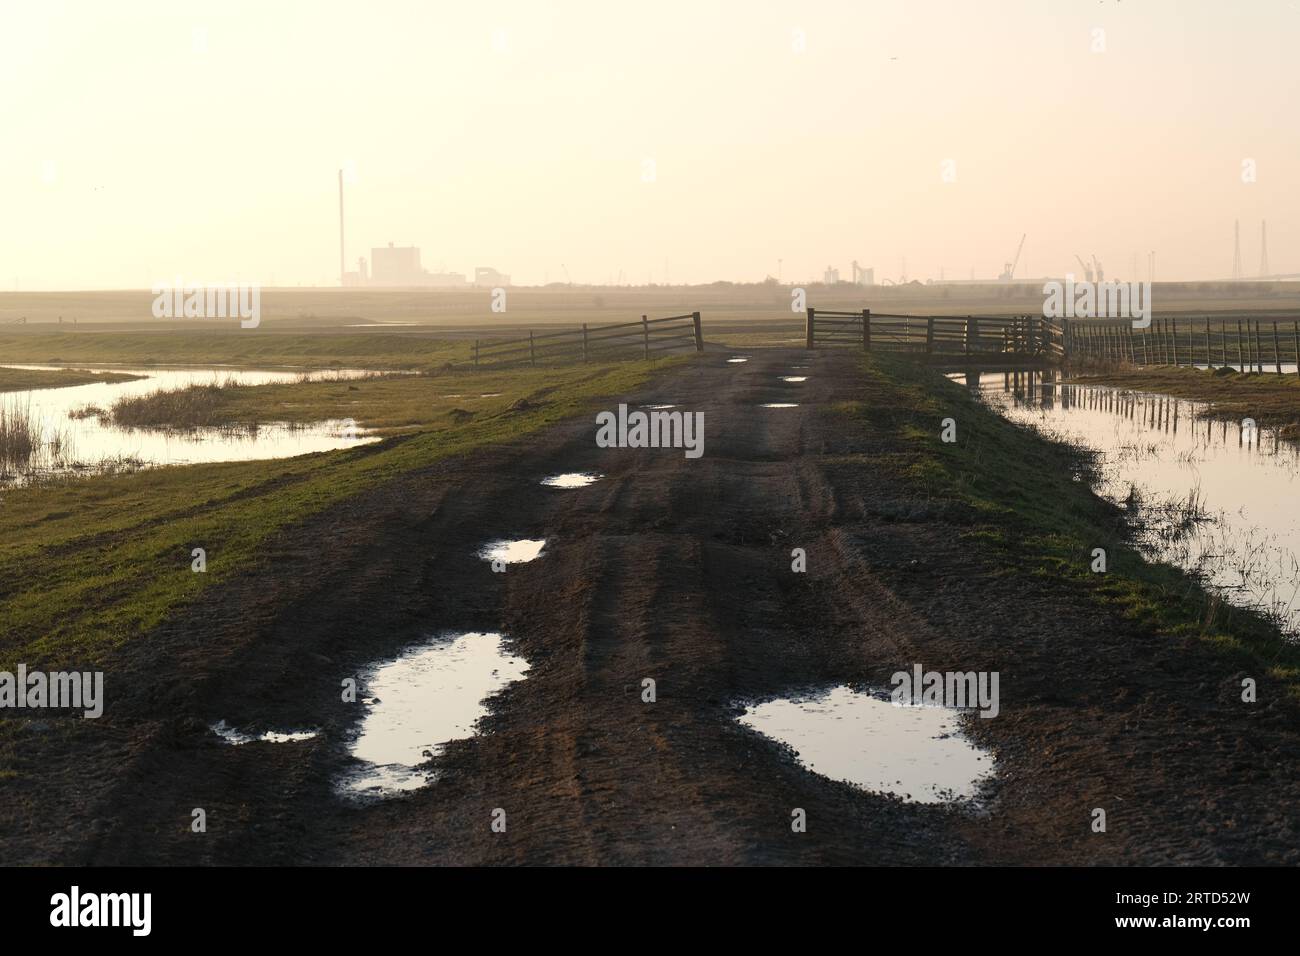 Wet farm track and gate with Elmley Cement Works in the background, Elmley, Isle of Sheppey, Kent, England Stock Photo